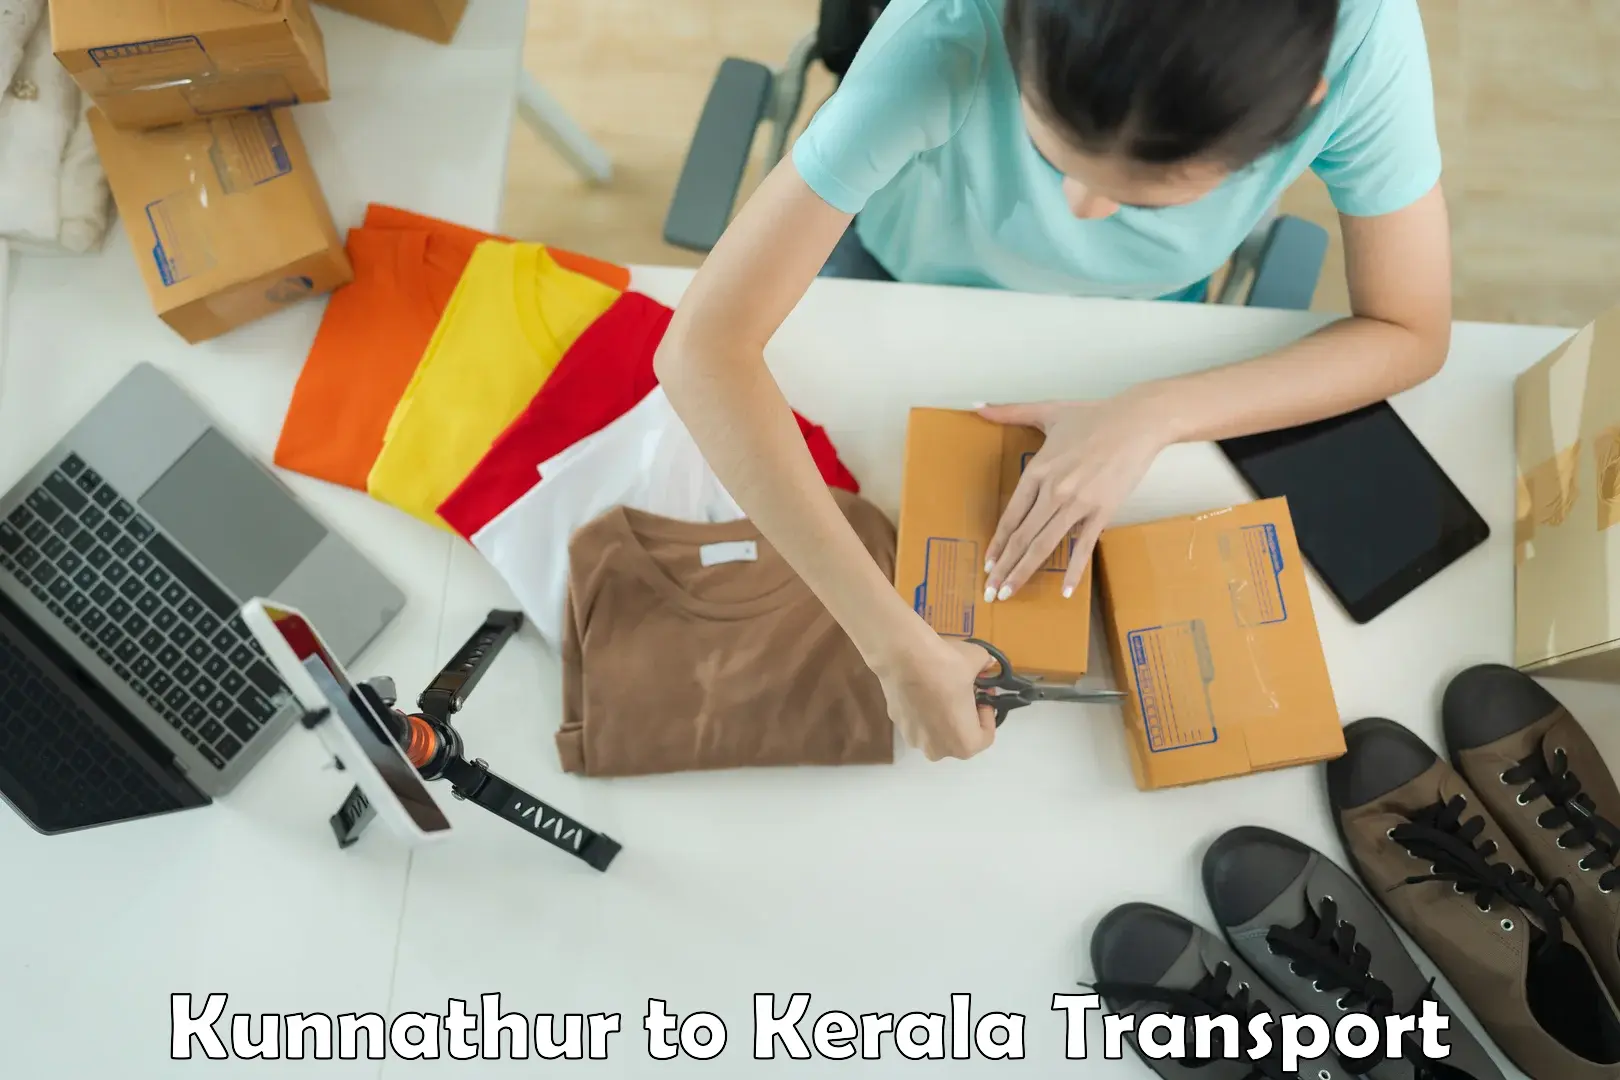 Commercial transport service Kunnathur to Cochin University of Science and Technology